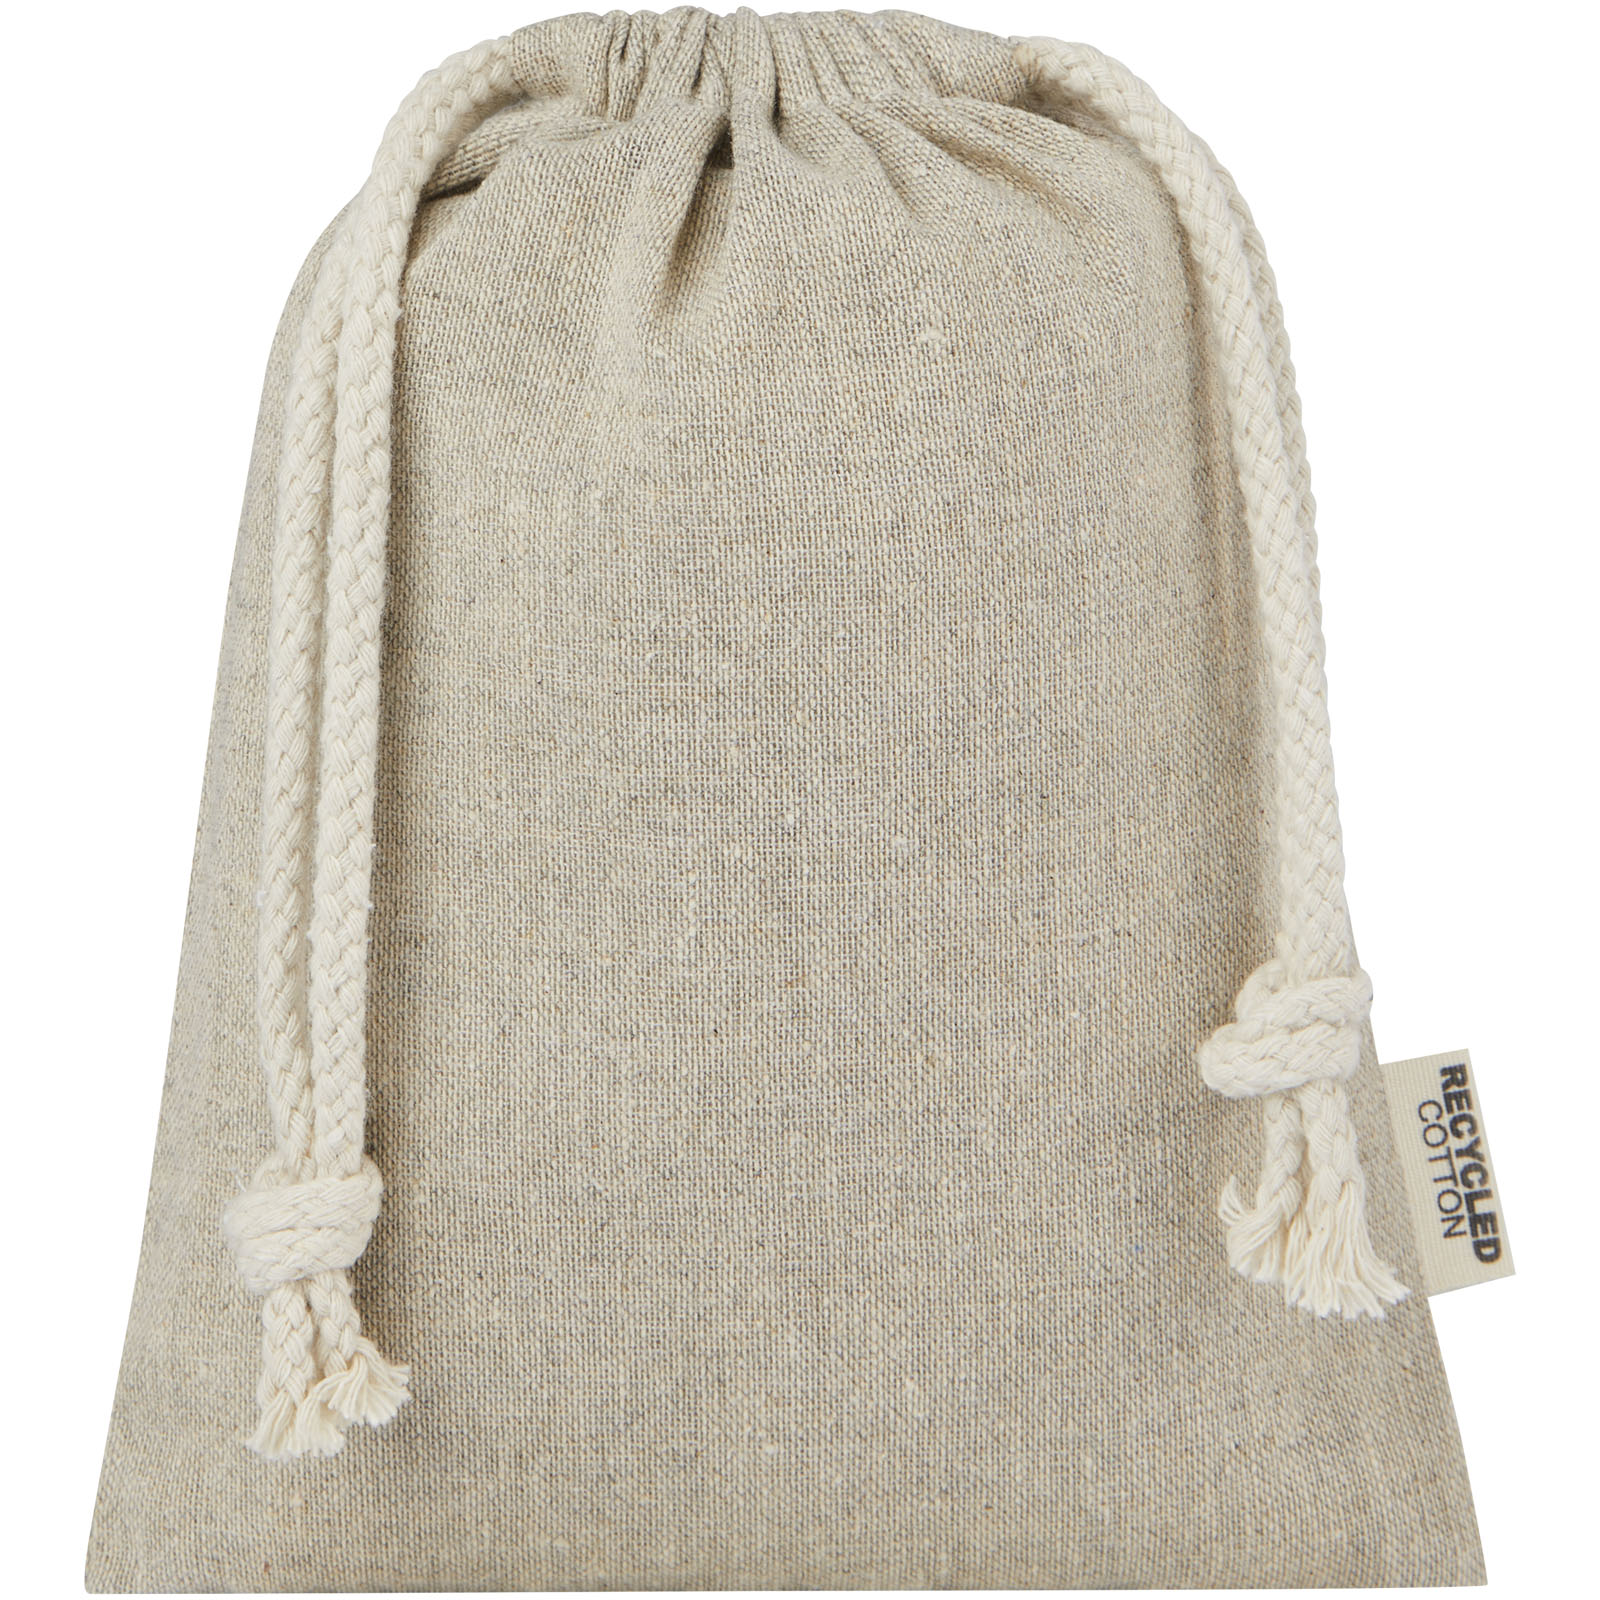 Advertising Cotton Bags - Pheebs 150 g/m² GRS recycled cotton gift bag small 0.5L - 1